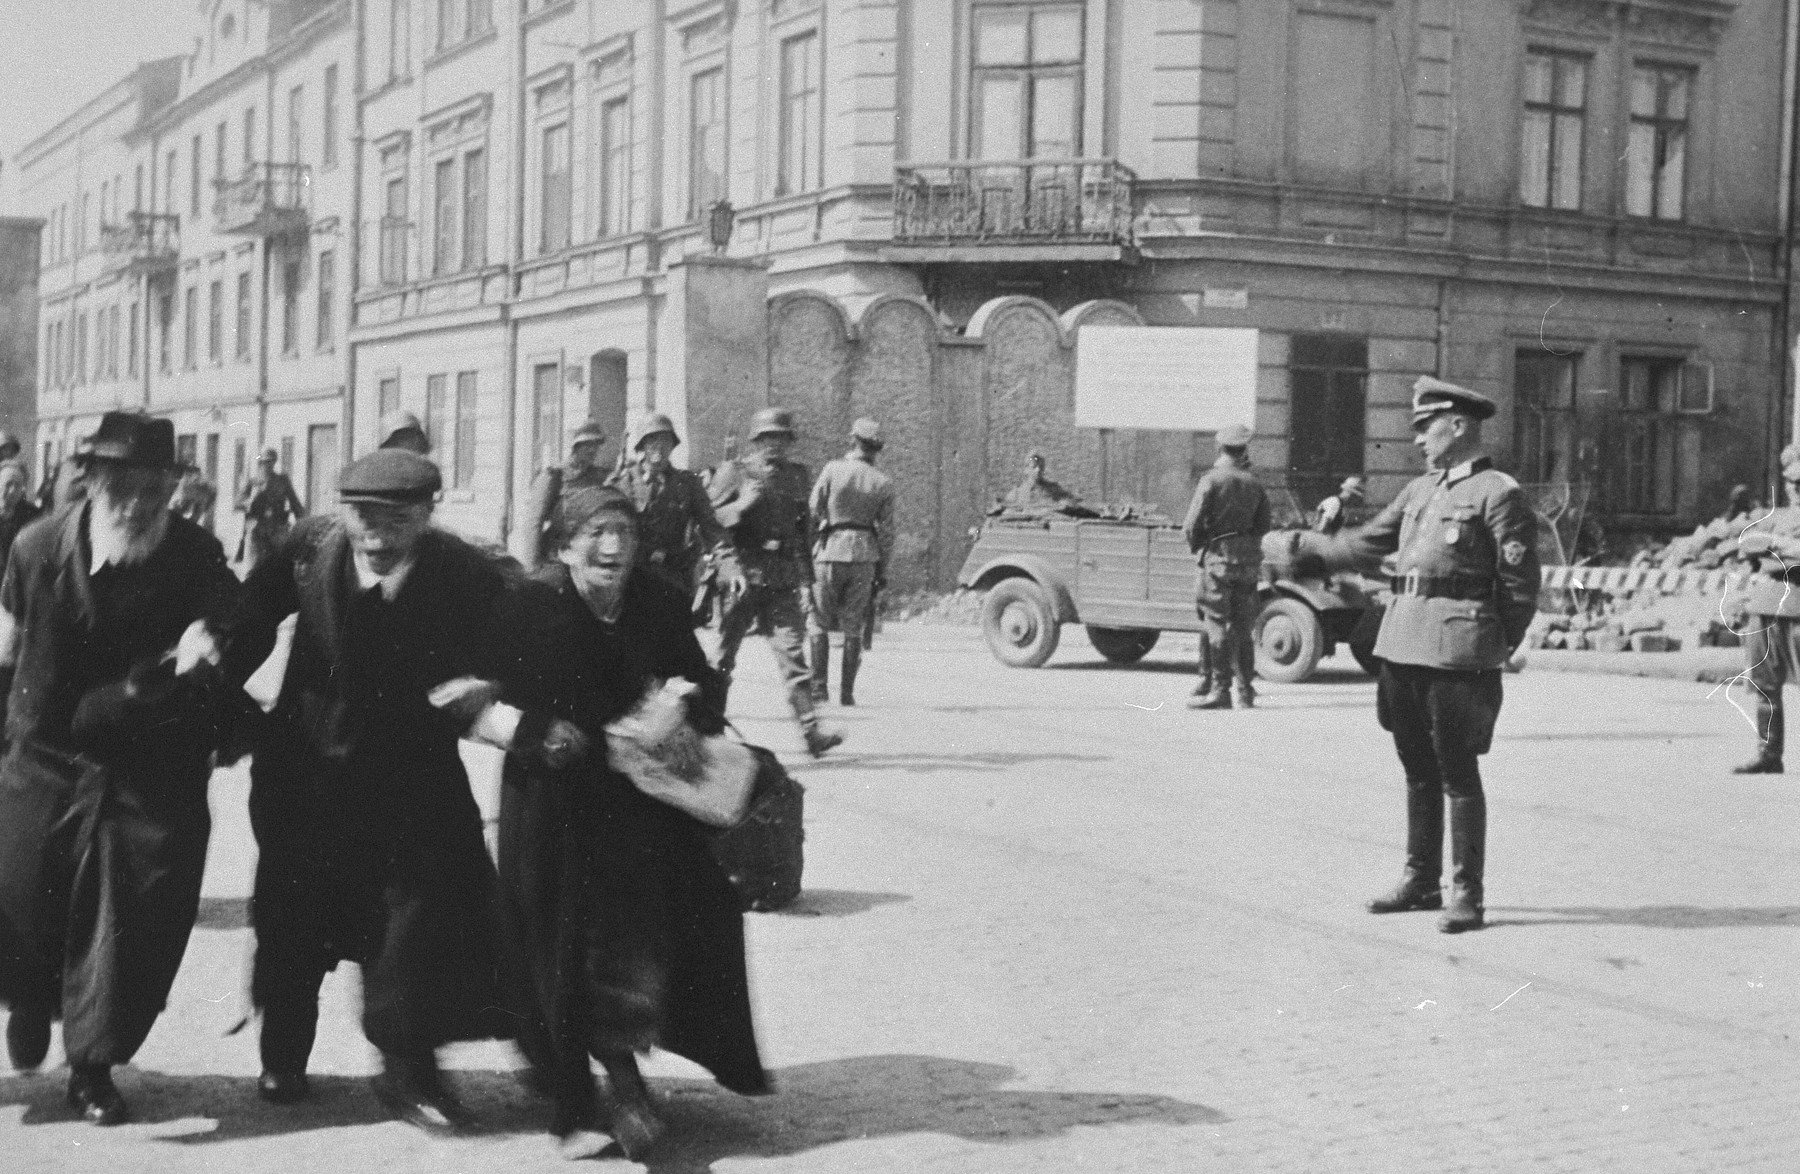 Three elderly Jews walk arm-in-arm through the streets of Krakow during the final liquidation action of the ghetto.